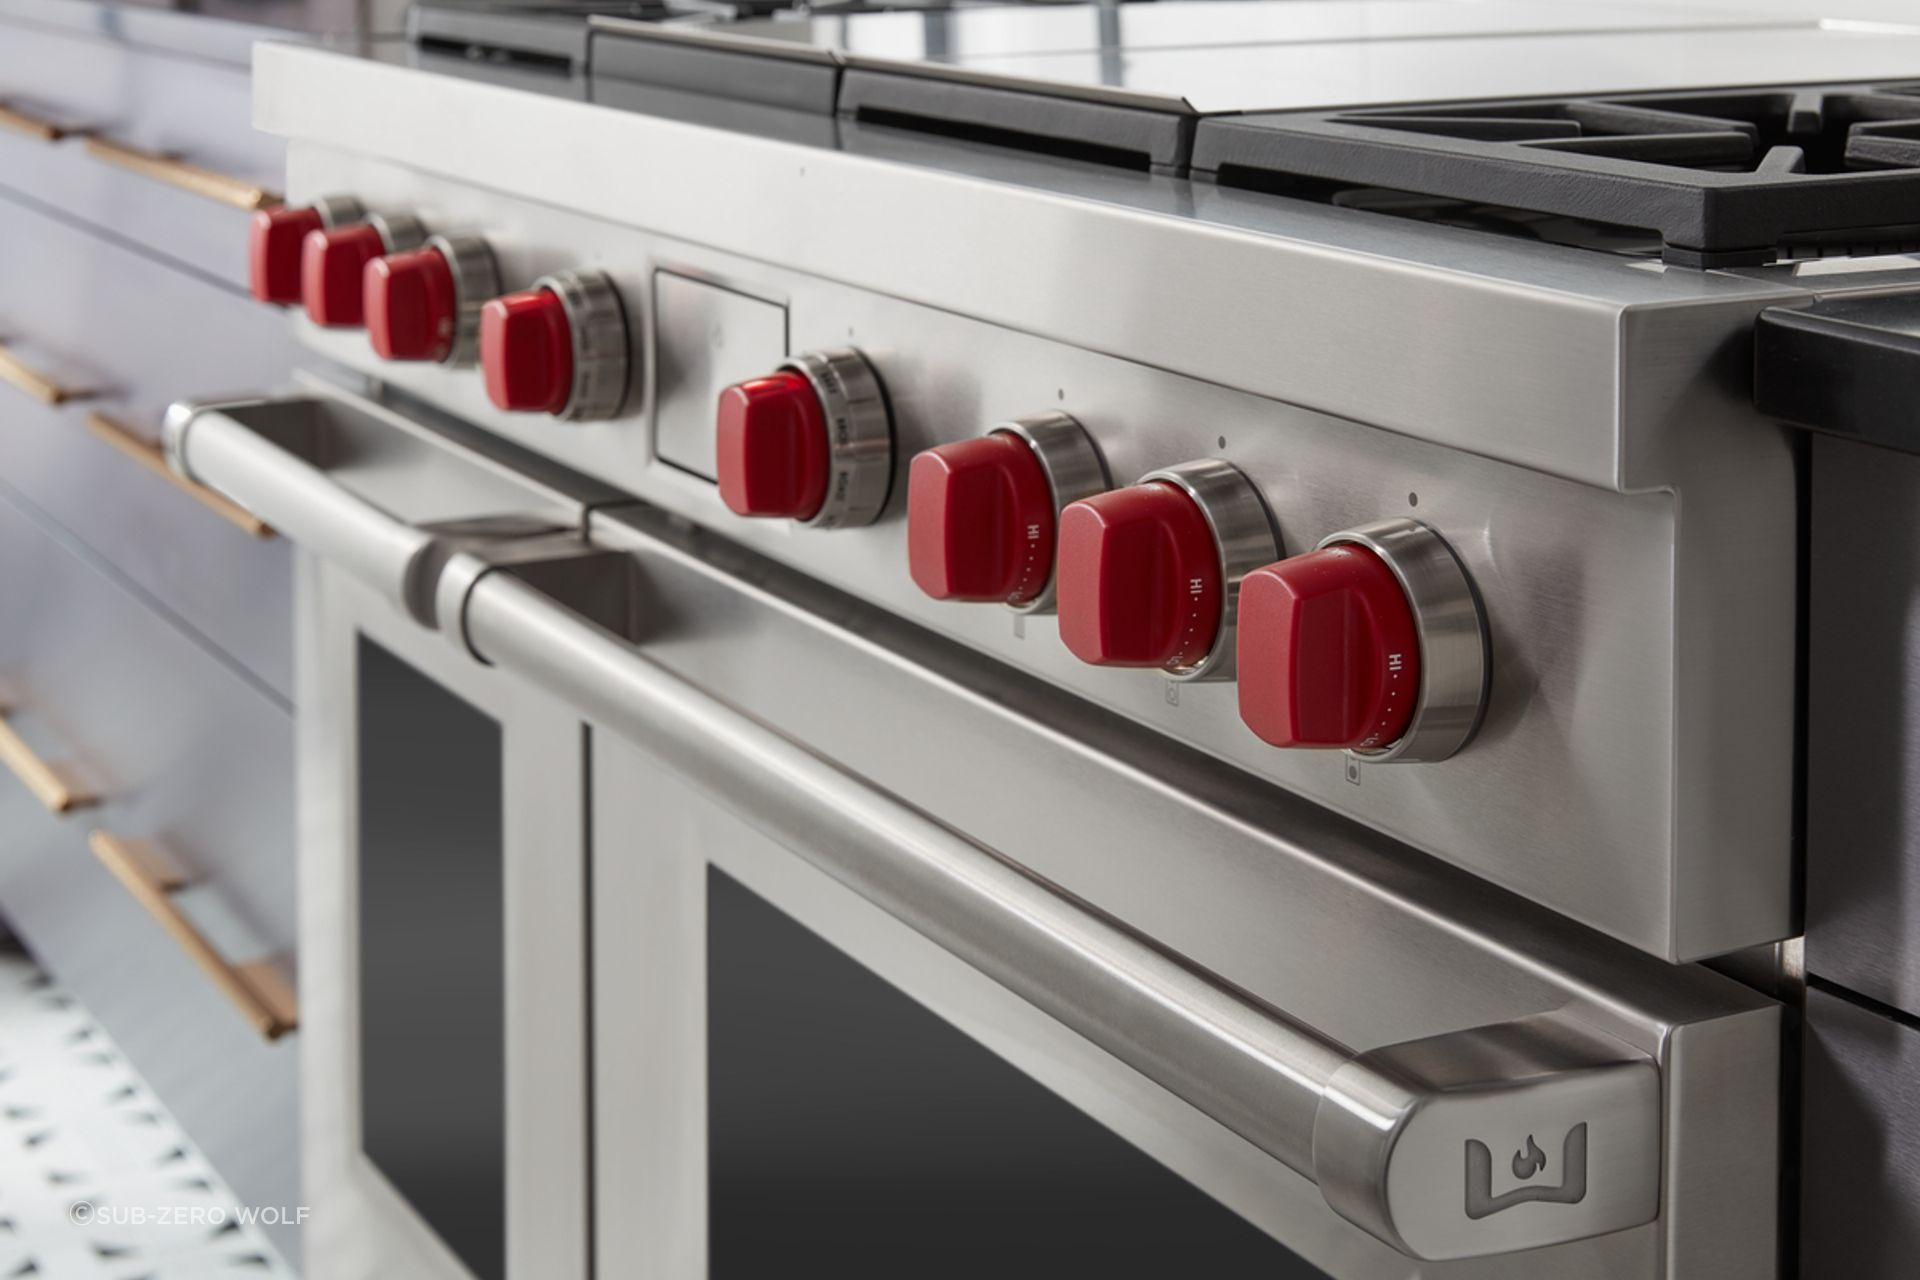 Wolf's Gourmet mode represents the future of cooking technology